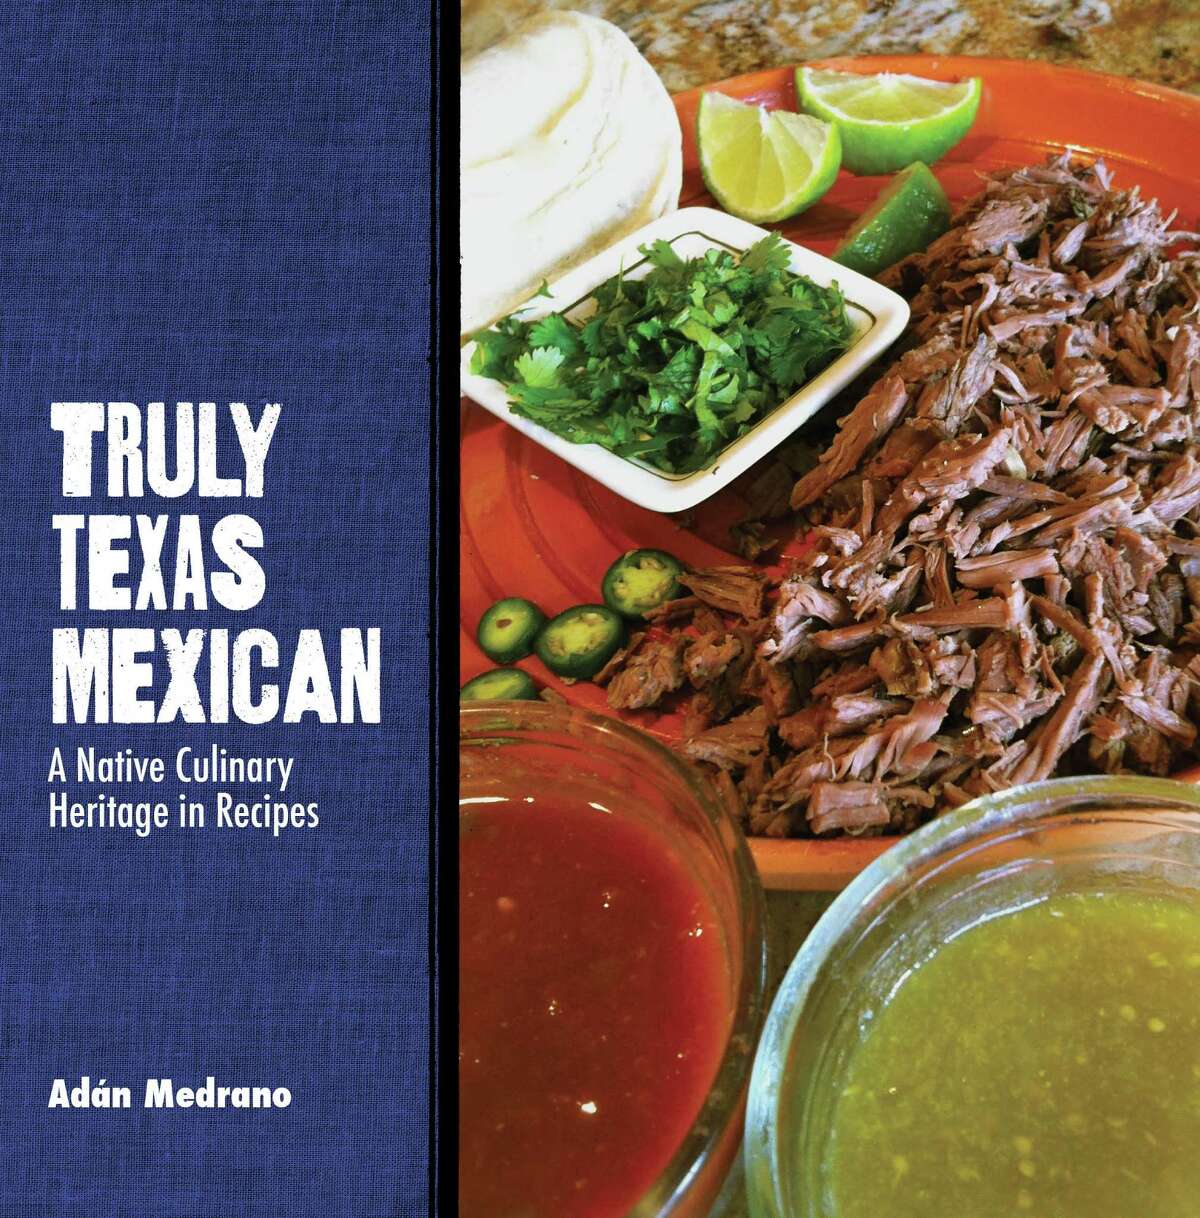 Cover "Truly Texas Mexican: A Native Culinary Heritage in Recipes" by Adan Medrano (Texas Tech University Press).